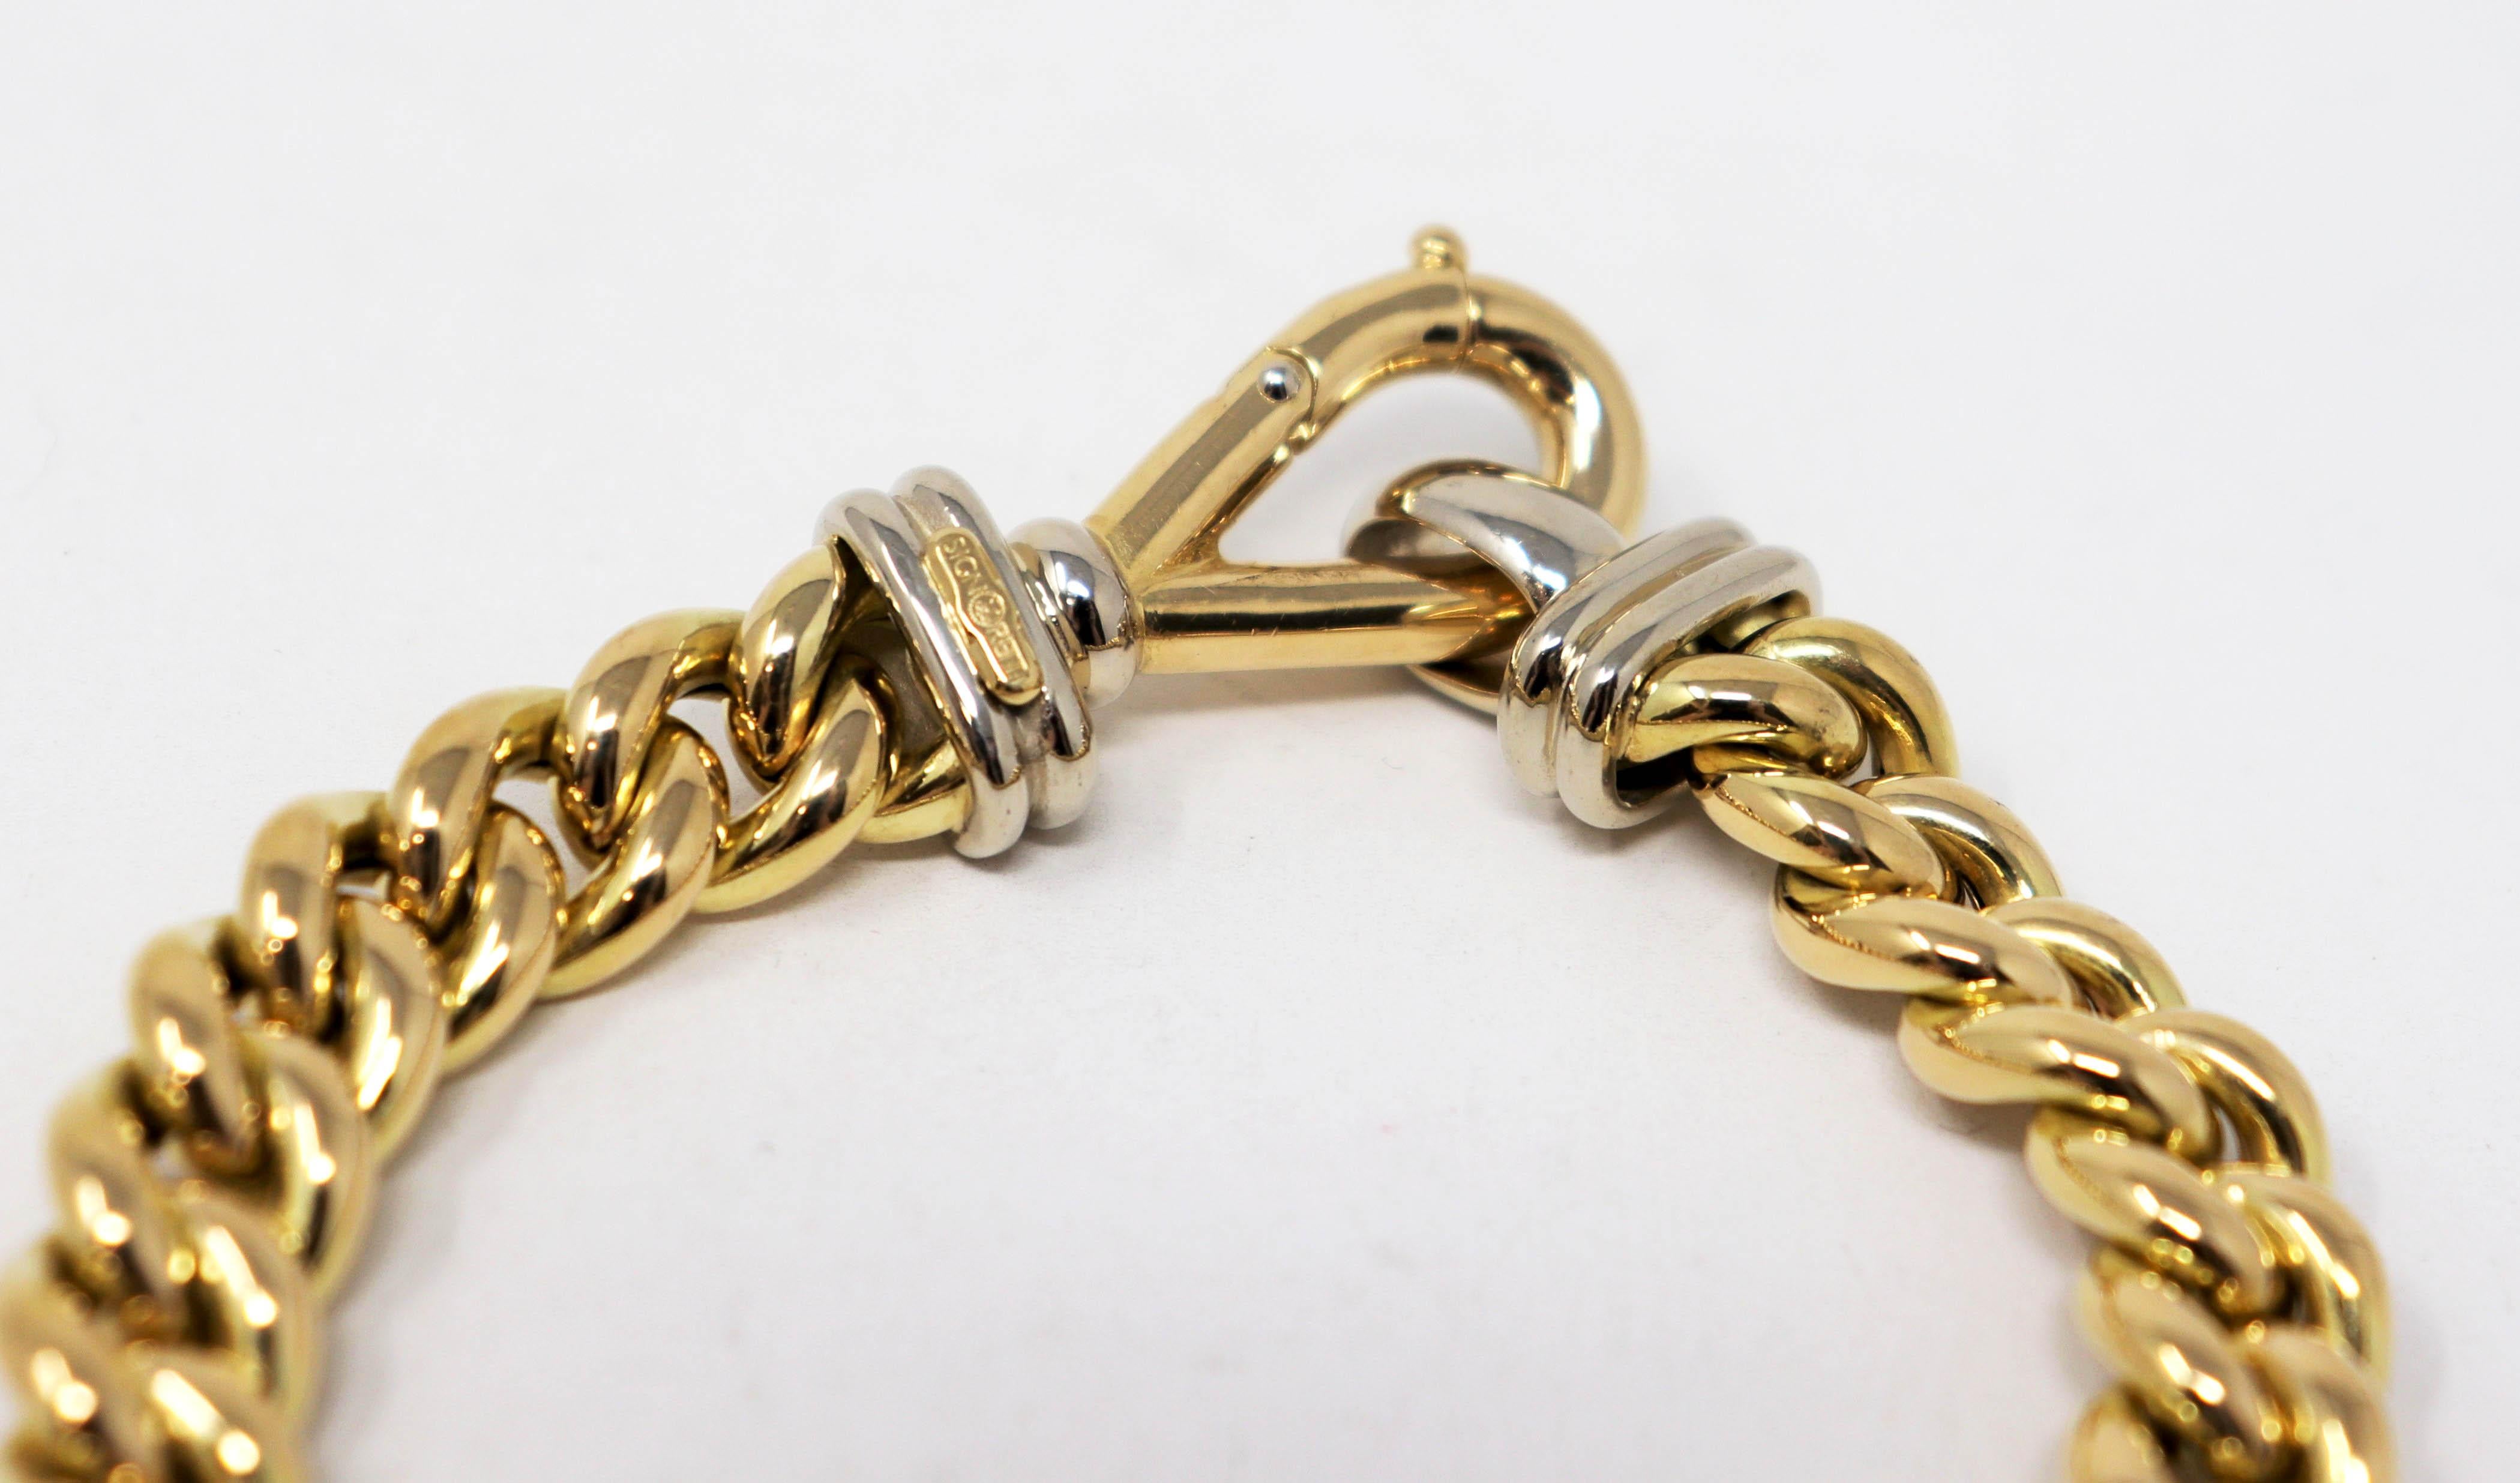 Women's or Men's Signoretti Polished 18 Karat Yellow and White Gold Curb Chain Link Bracelet